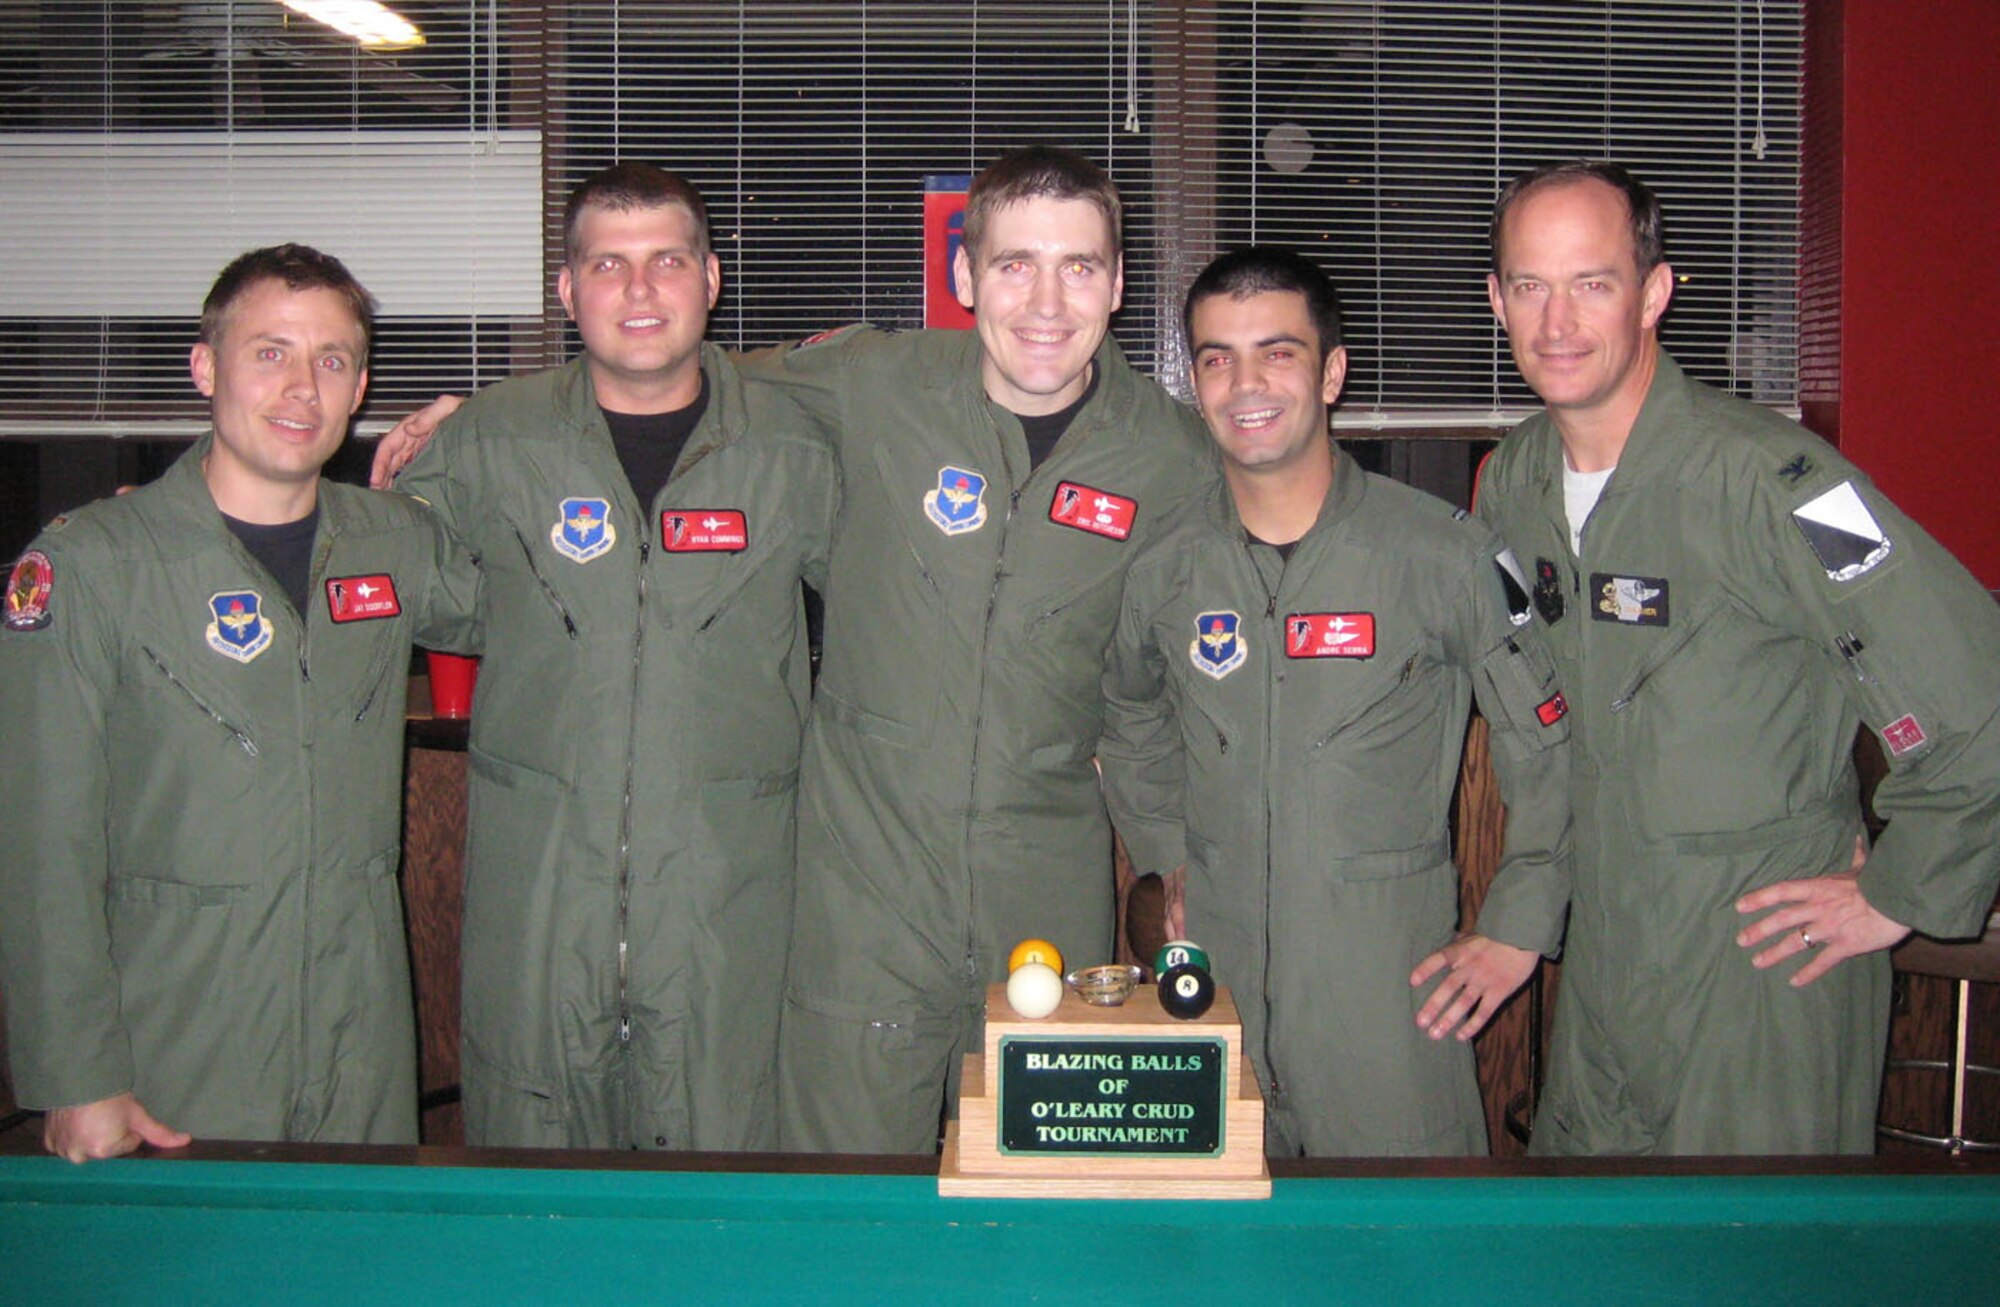 Members of the Specialized Undergraduate Pilot Training Class 08-09 took home the Blazing Balls of O'Leary crud tournament trophy Friday night following the Specialized Undergraduate Pilot Training class 08-06 assignment night. The members of the winning team are: 2nd Lt. Jay Doerfler, 2nd Lt. Ryan Cummings, 2nd Capt. Eric Hutcheson and 2nd Lt. Andre Serra. They are seen here with Col. Dave Gerber, 14th Flying Training Wing commander. (U.S. Air Force photo by 2nd Lt. Carlos Hernandez)